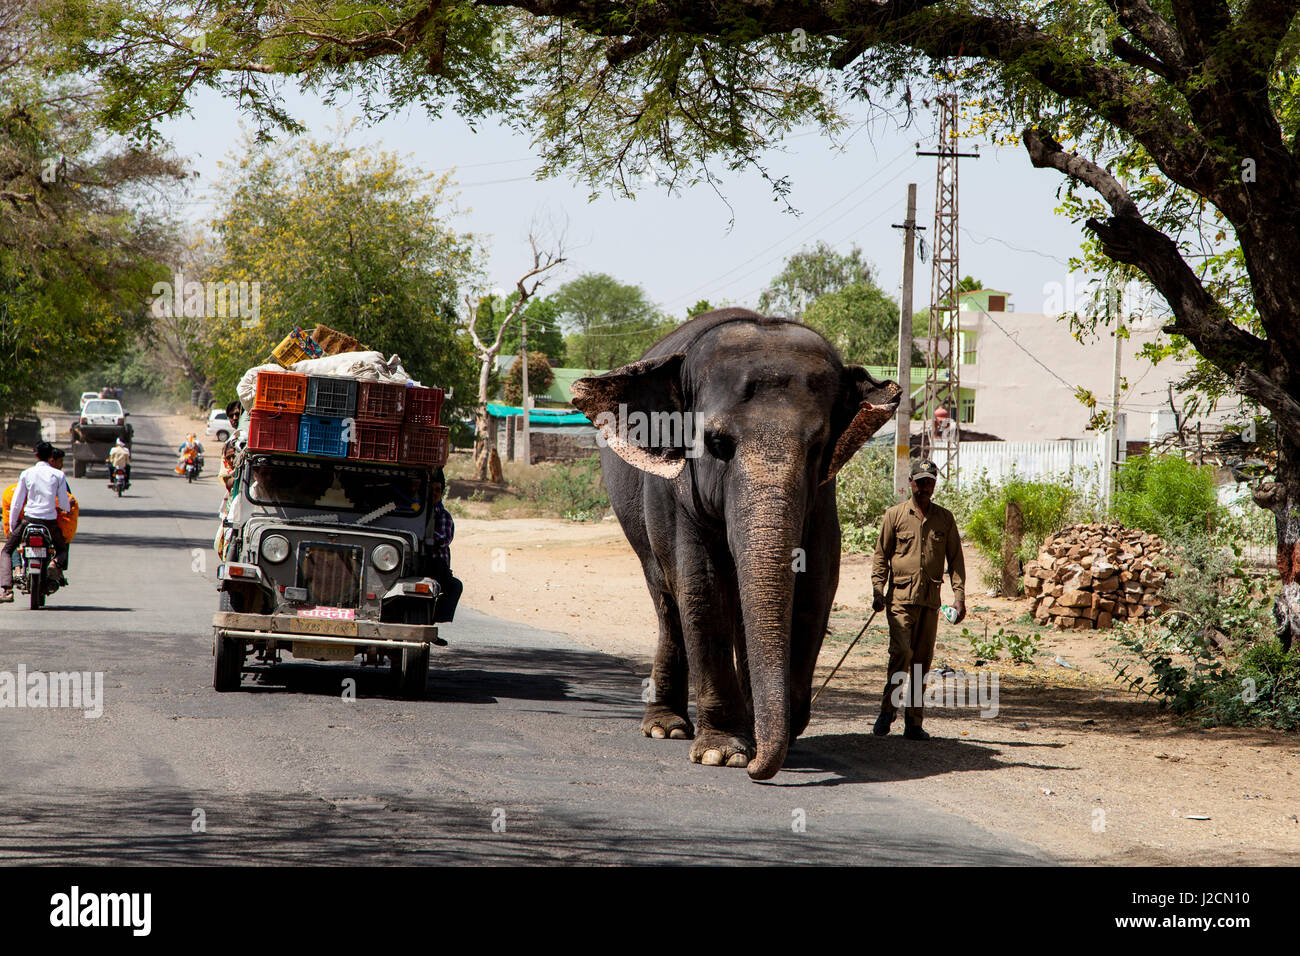 Typical Scene On A Rural Road In Rajasthan India Stock Photo Alamy